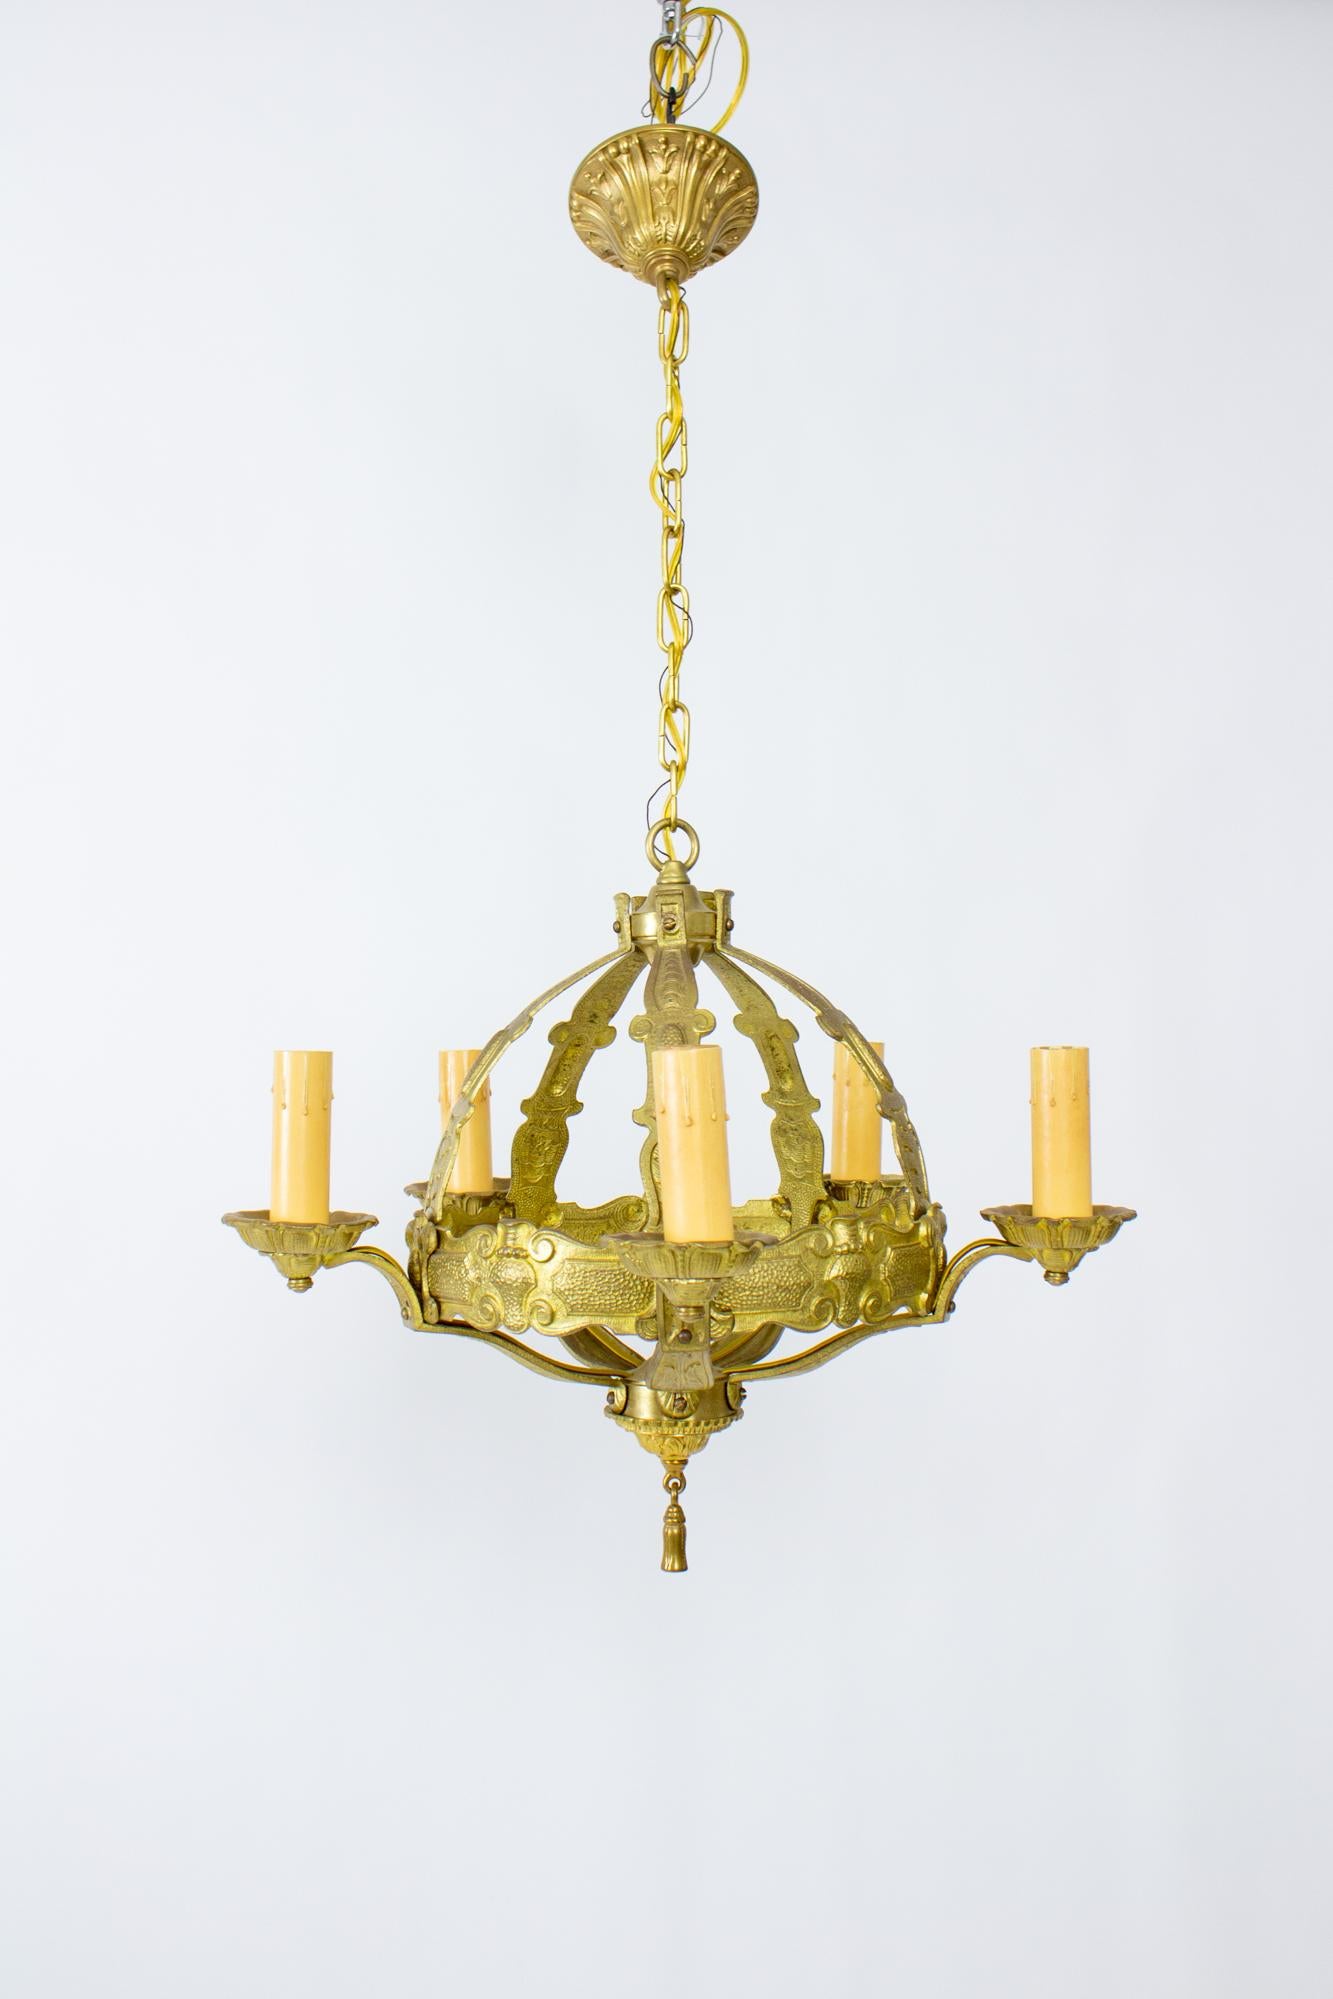 1920’s brass gothic revival chandelier with five arms, also can be referred to as tudor style. This chandelier is solid cast brass with a cage form and central roped stem. The five arms are cups that extend from the central orb or the cage. Brass